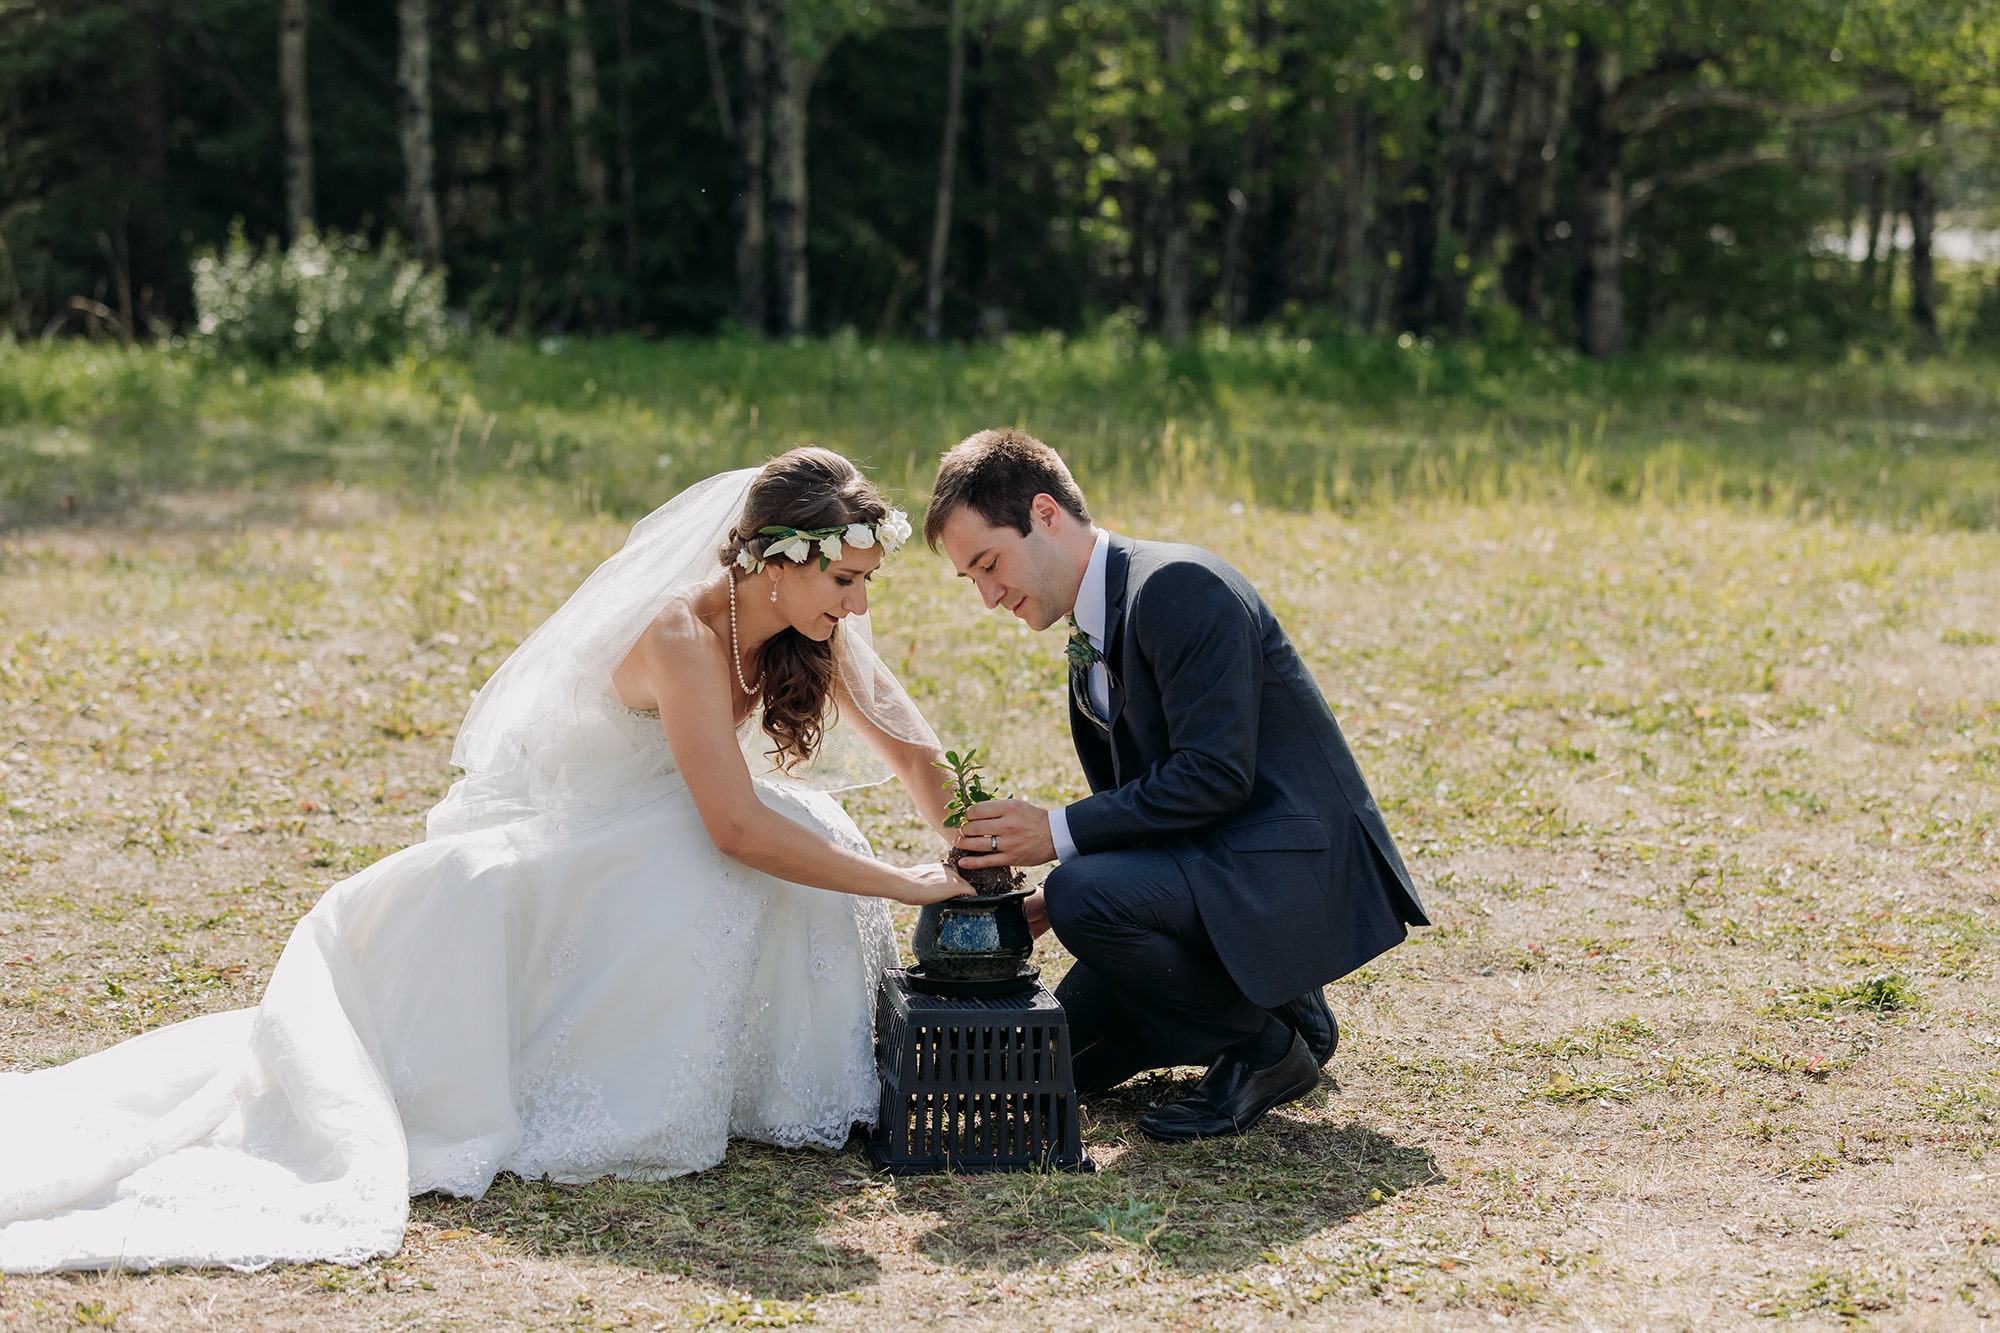 Rundleview Parkette wedding ceremony Canmore